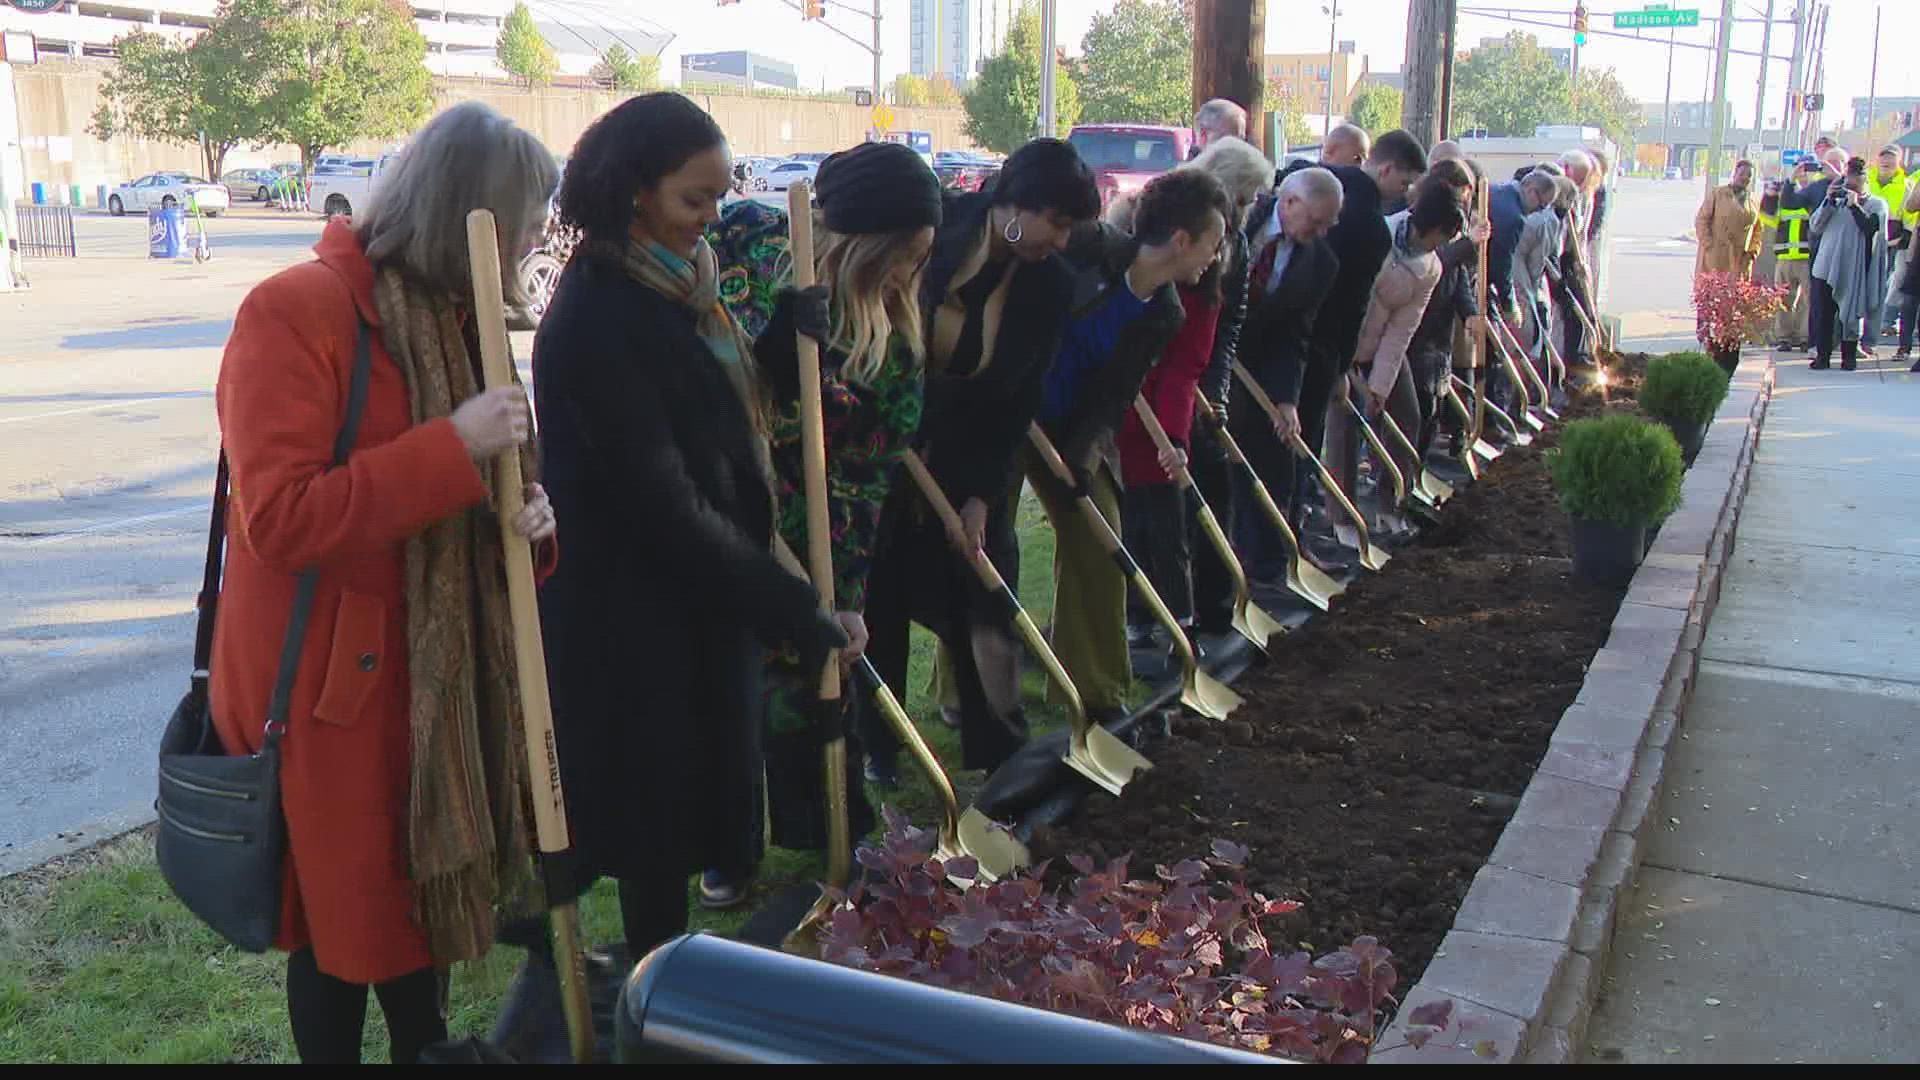 A groundbreaking ceremony was held downtown Thursday.